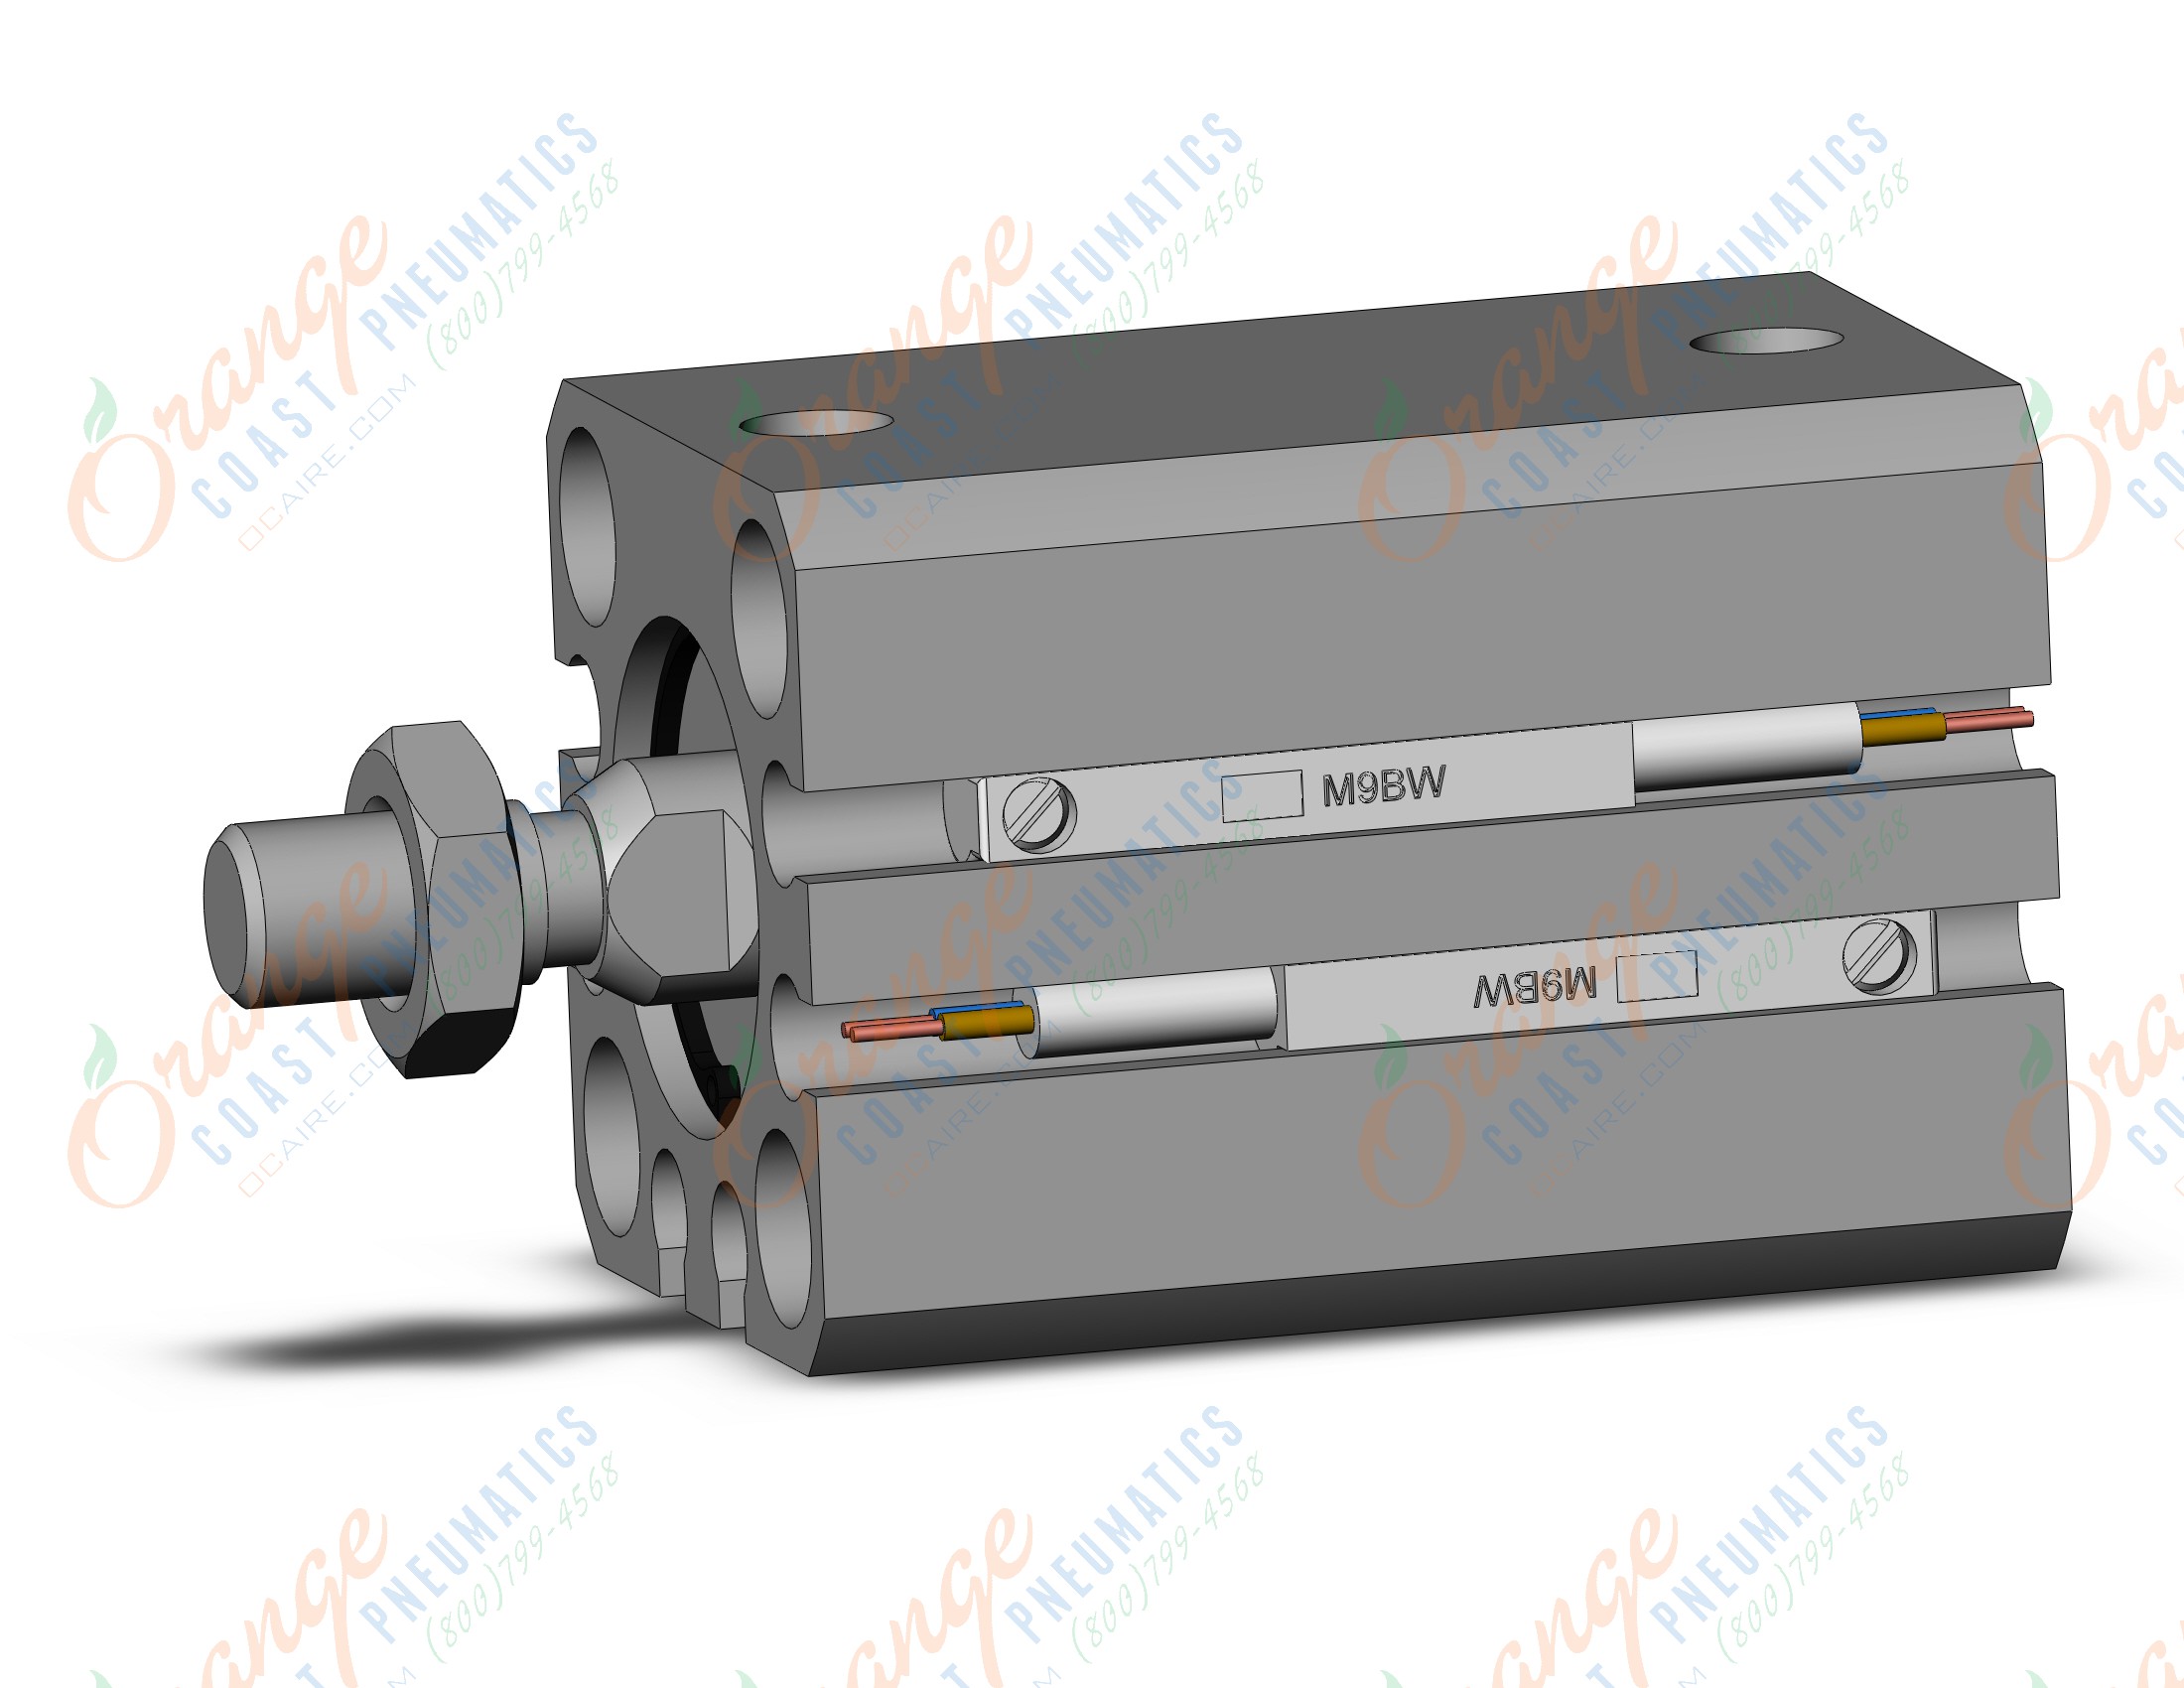 SMC CDQSB16-20DM-M9BWL cylinder, compact, COMPACT CYLINDER